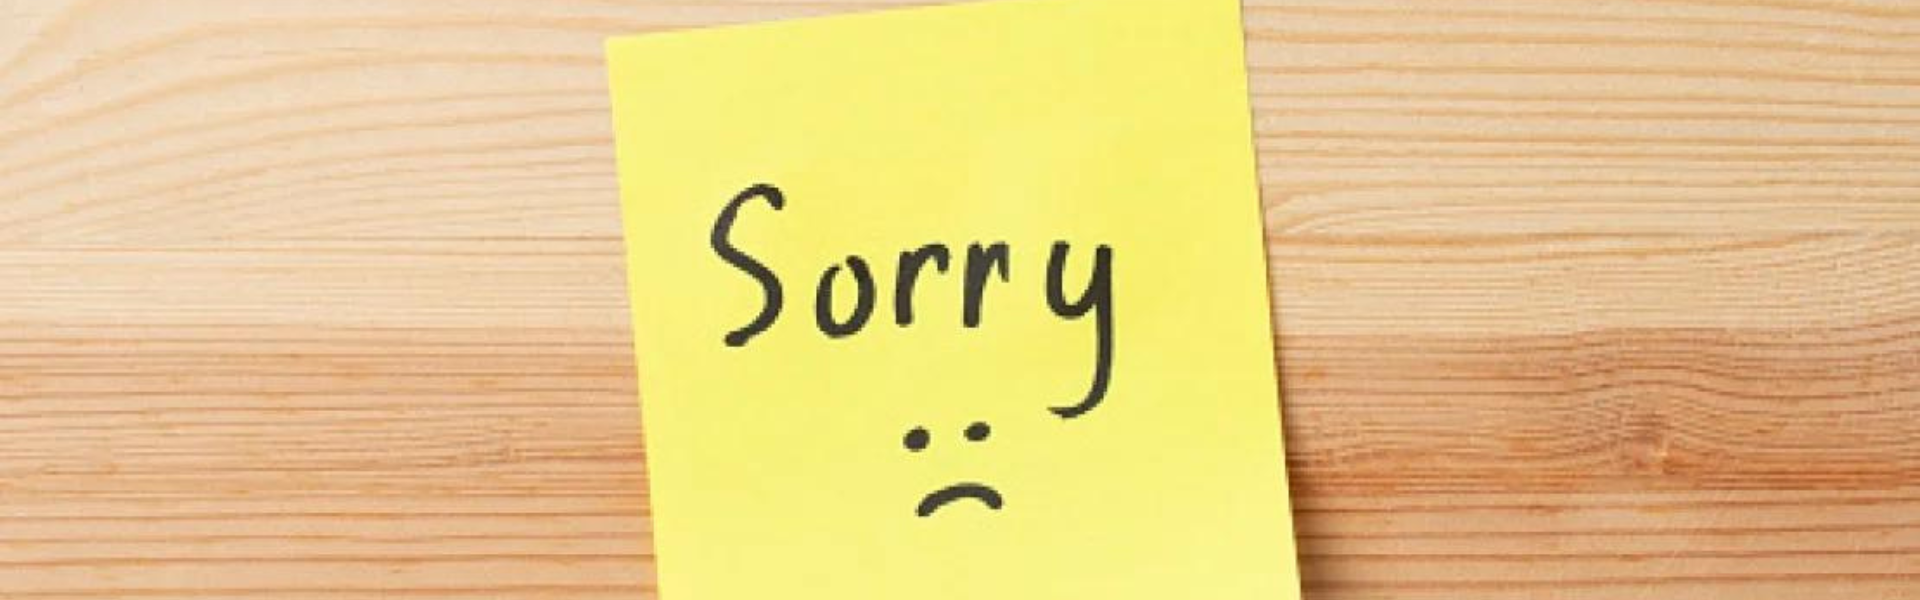 Image of woodgrain with a yellow post-it note saying "Sorry" and a frowning face